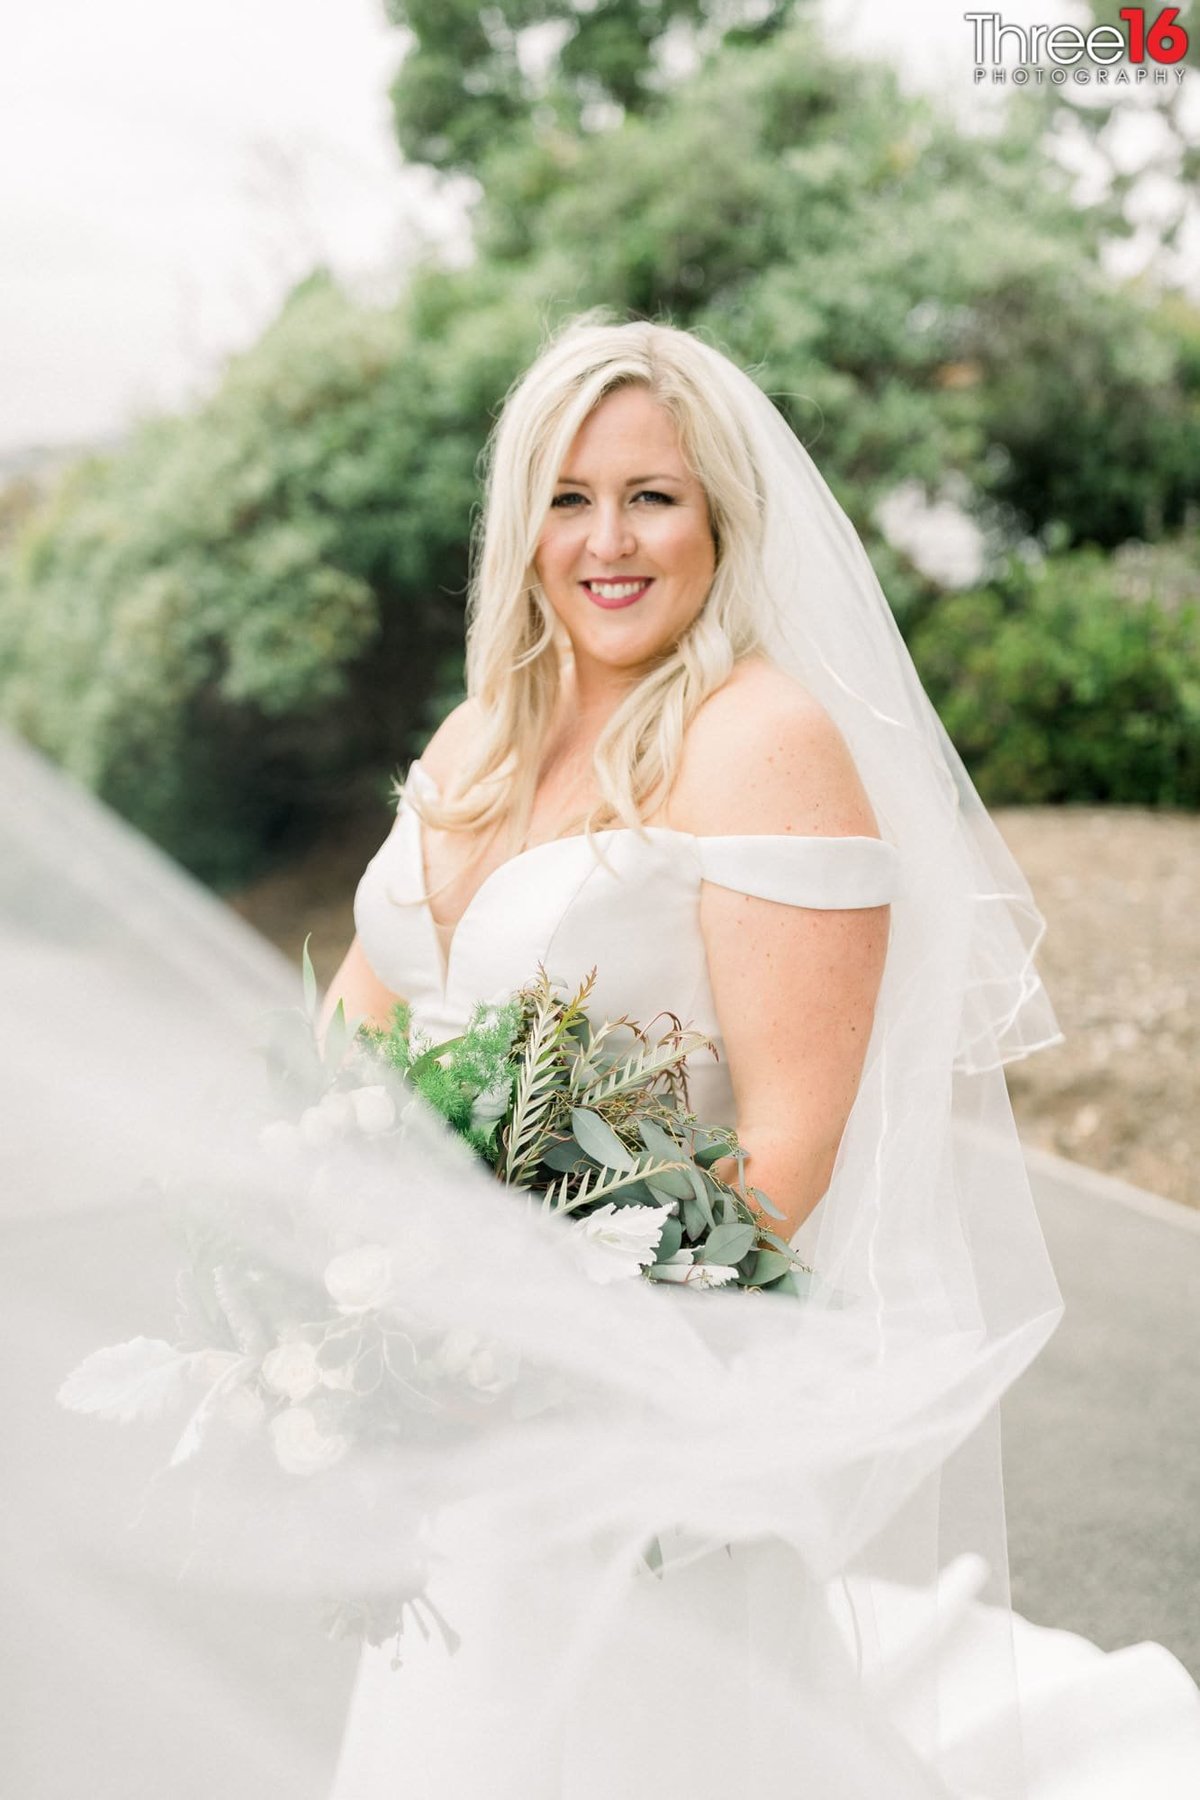 Bride poses with a big smile for wedding photographer